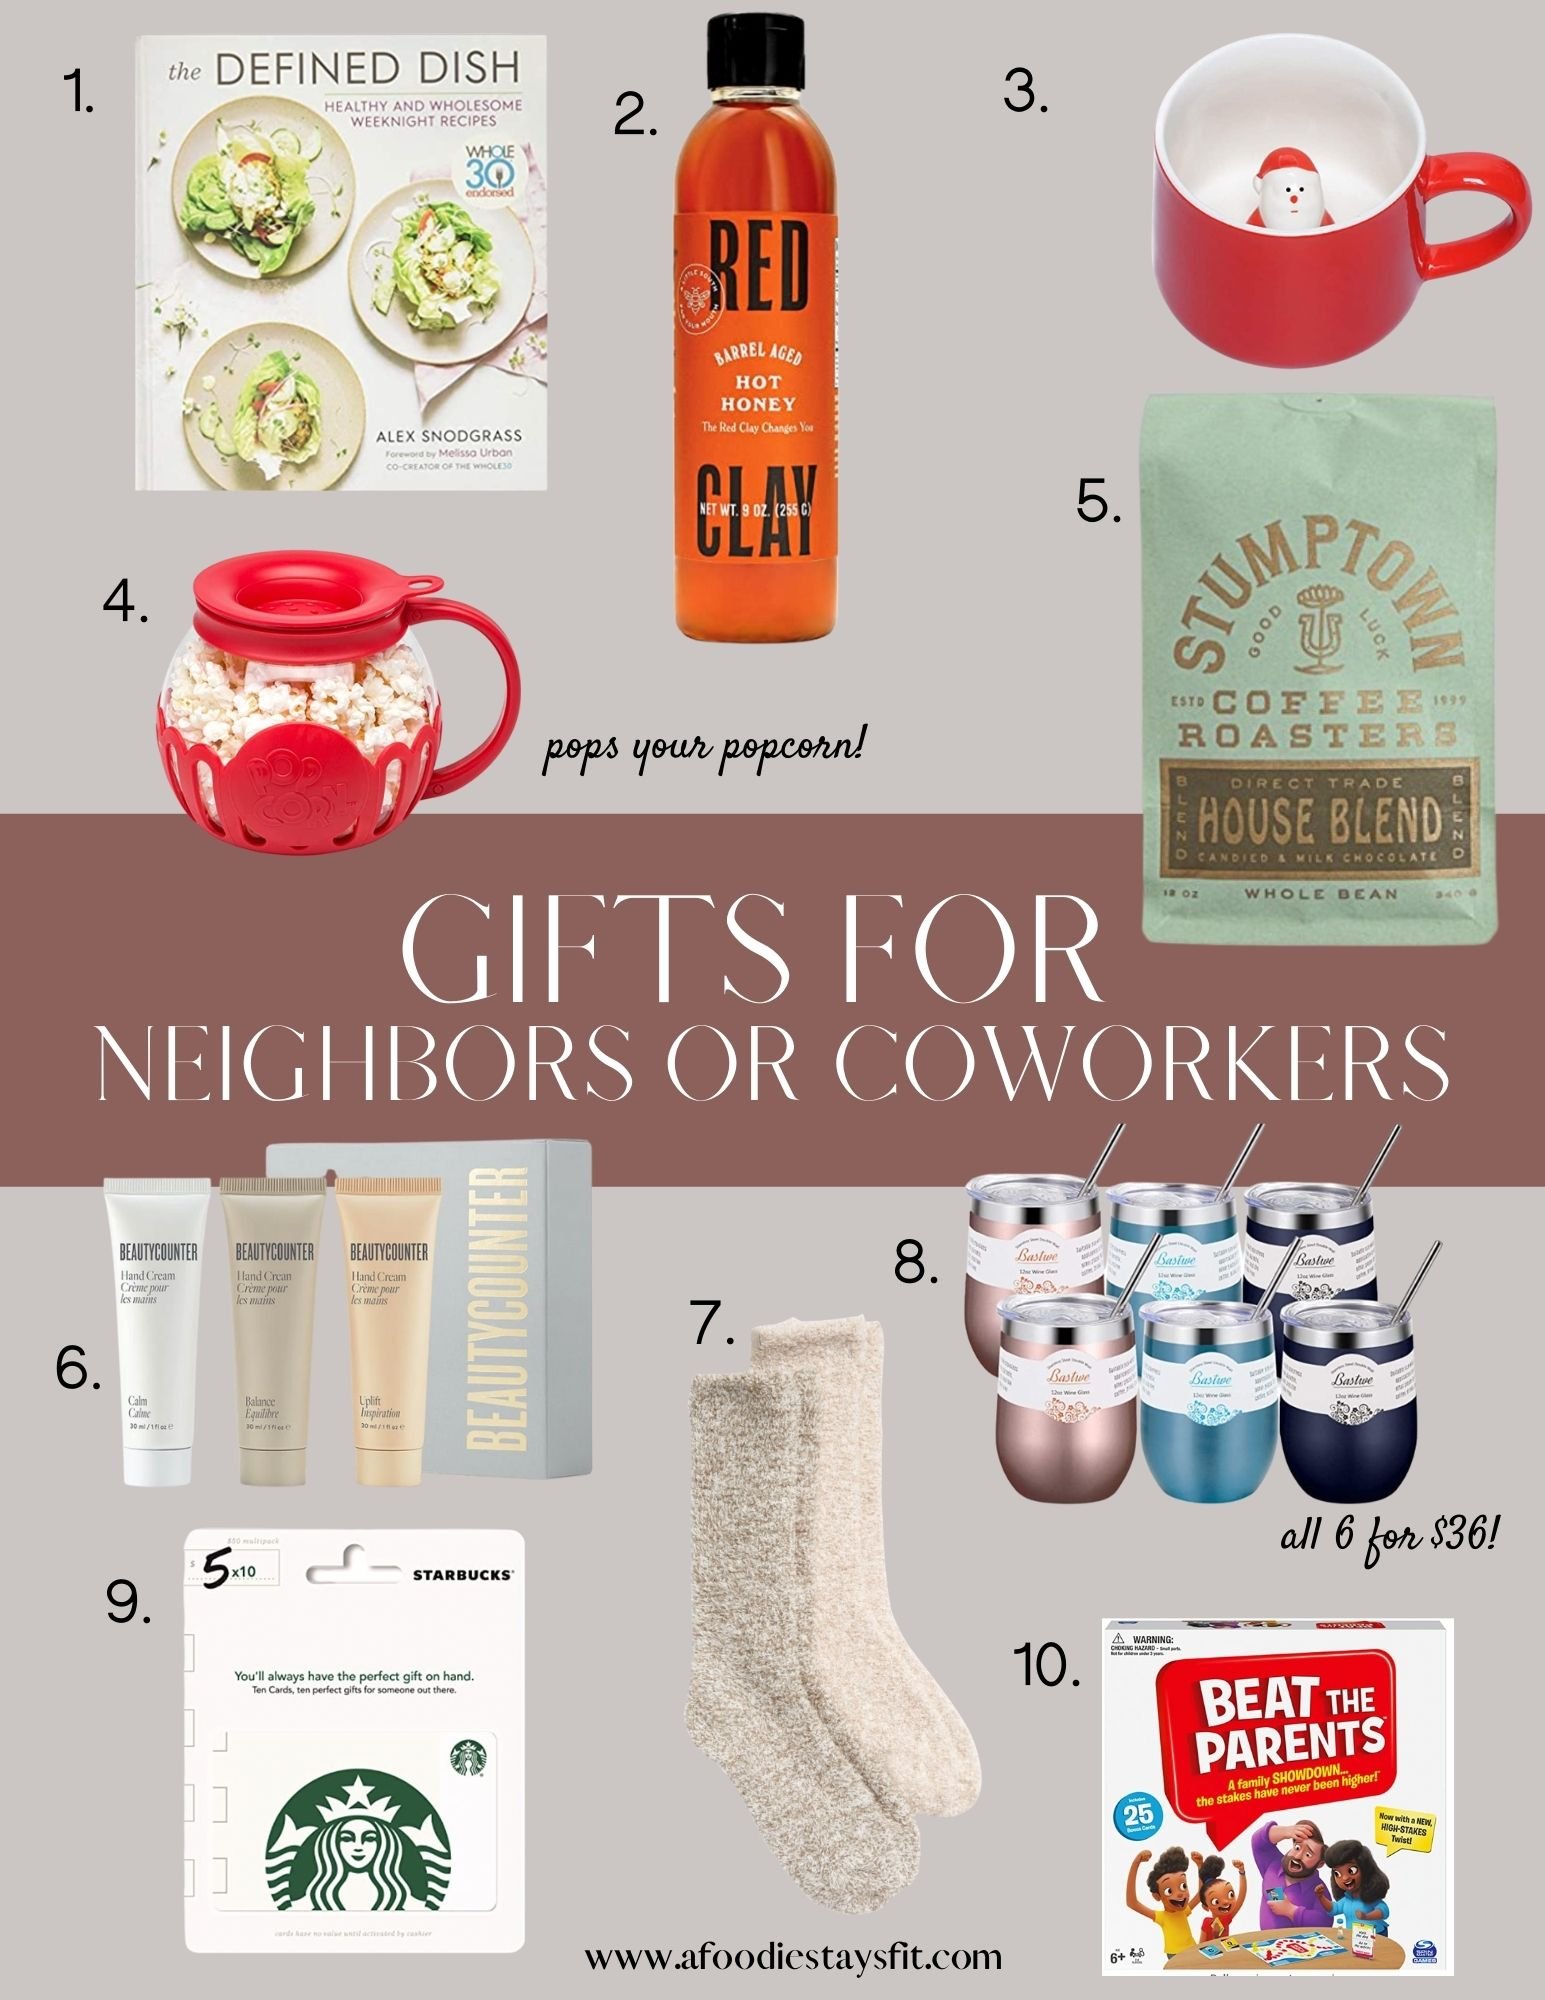 Gifts for Neighbors or Coworkers